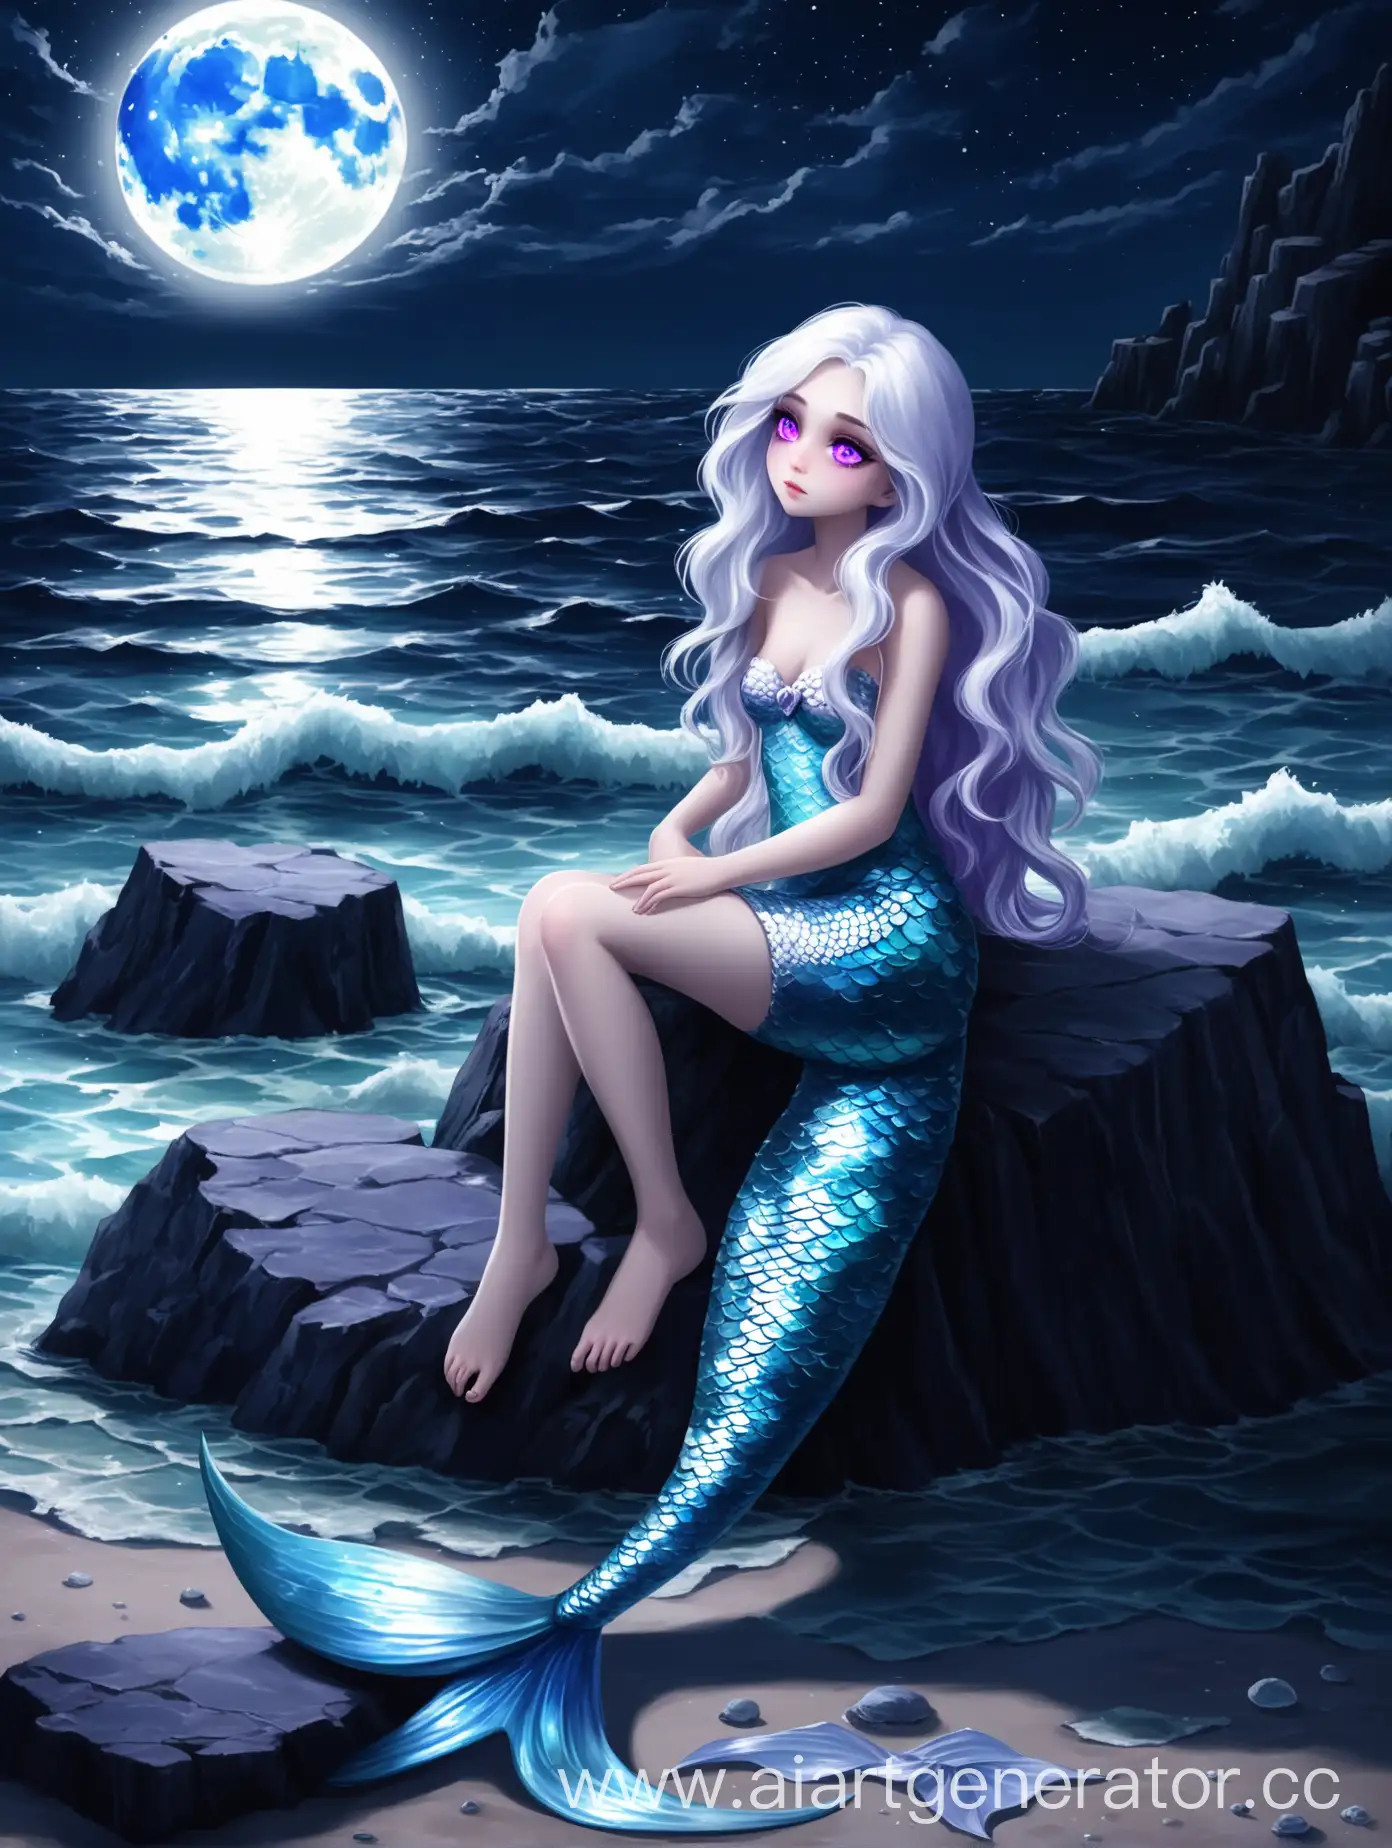 Mermaid-with-Violet-Eyes-Sitting-on-Moonlit-Stone-by-the-Sea